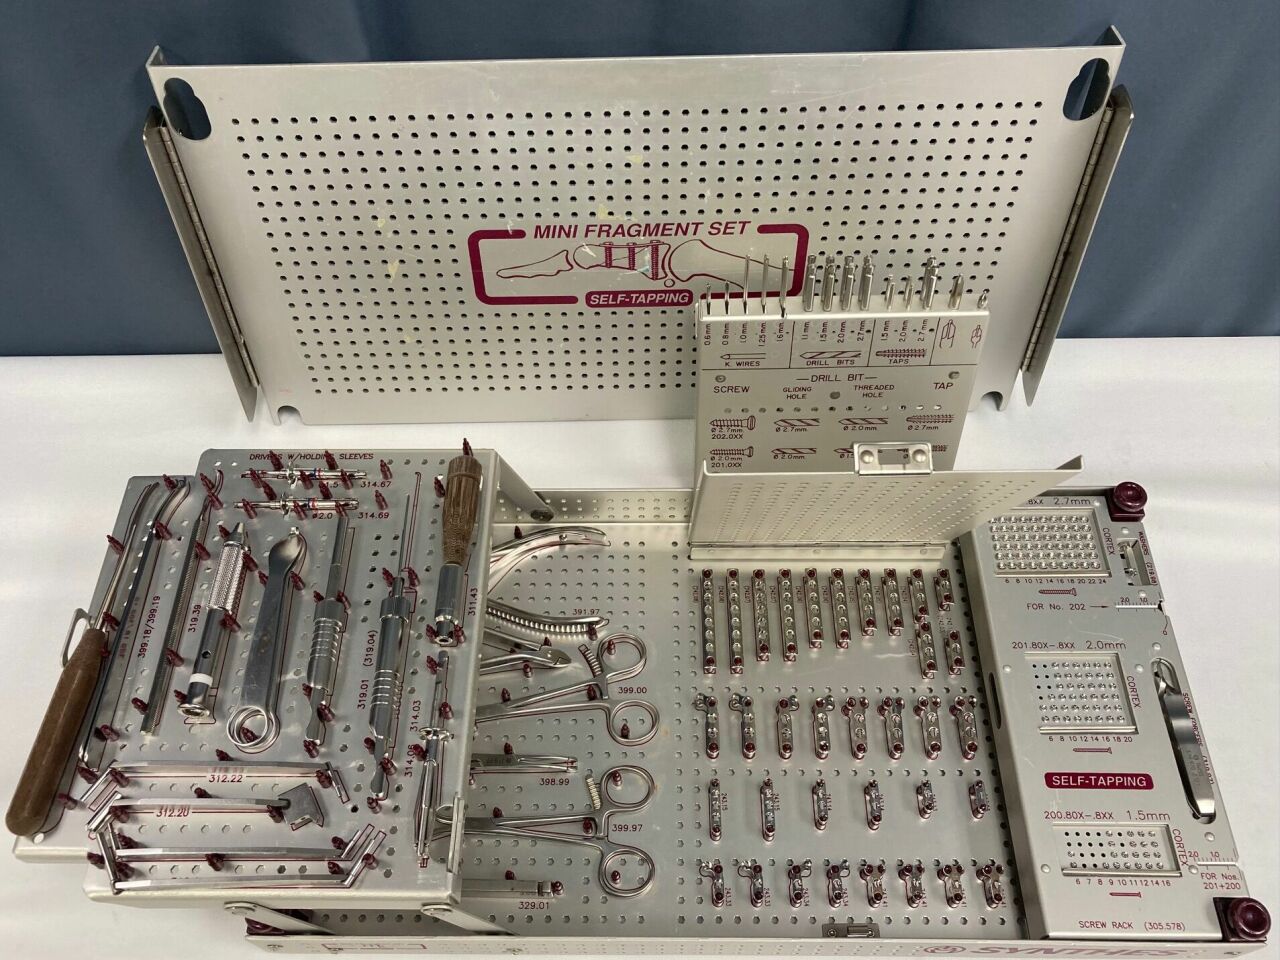 Mini Fragment Instrument & Implant Set w/ Self Tapping Screws 105.488 CCMED301